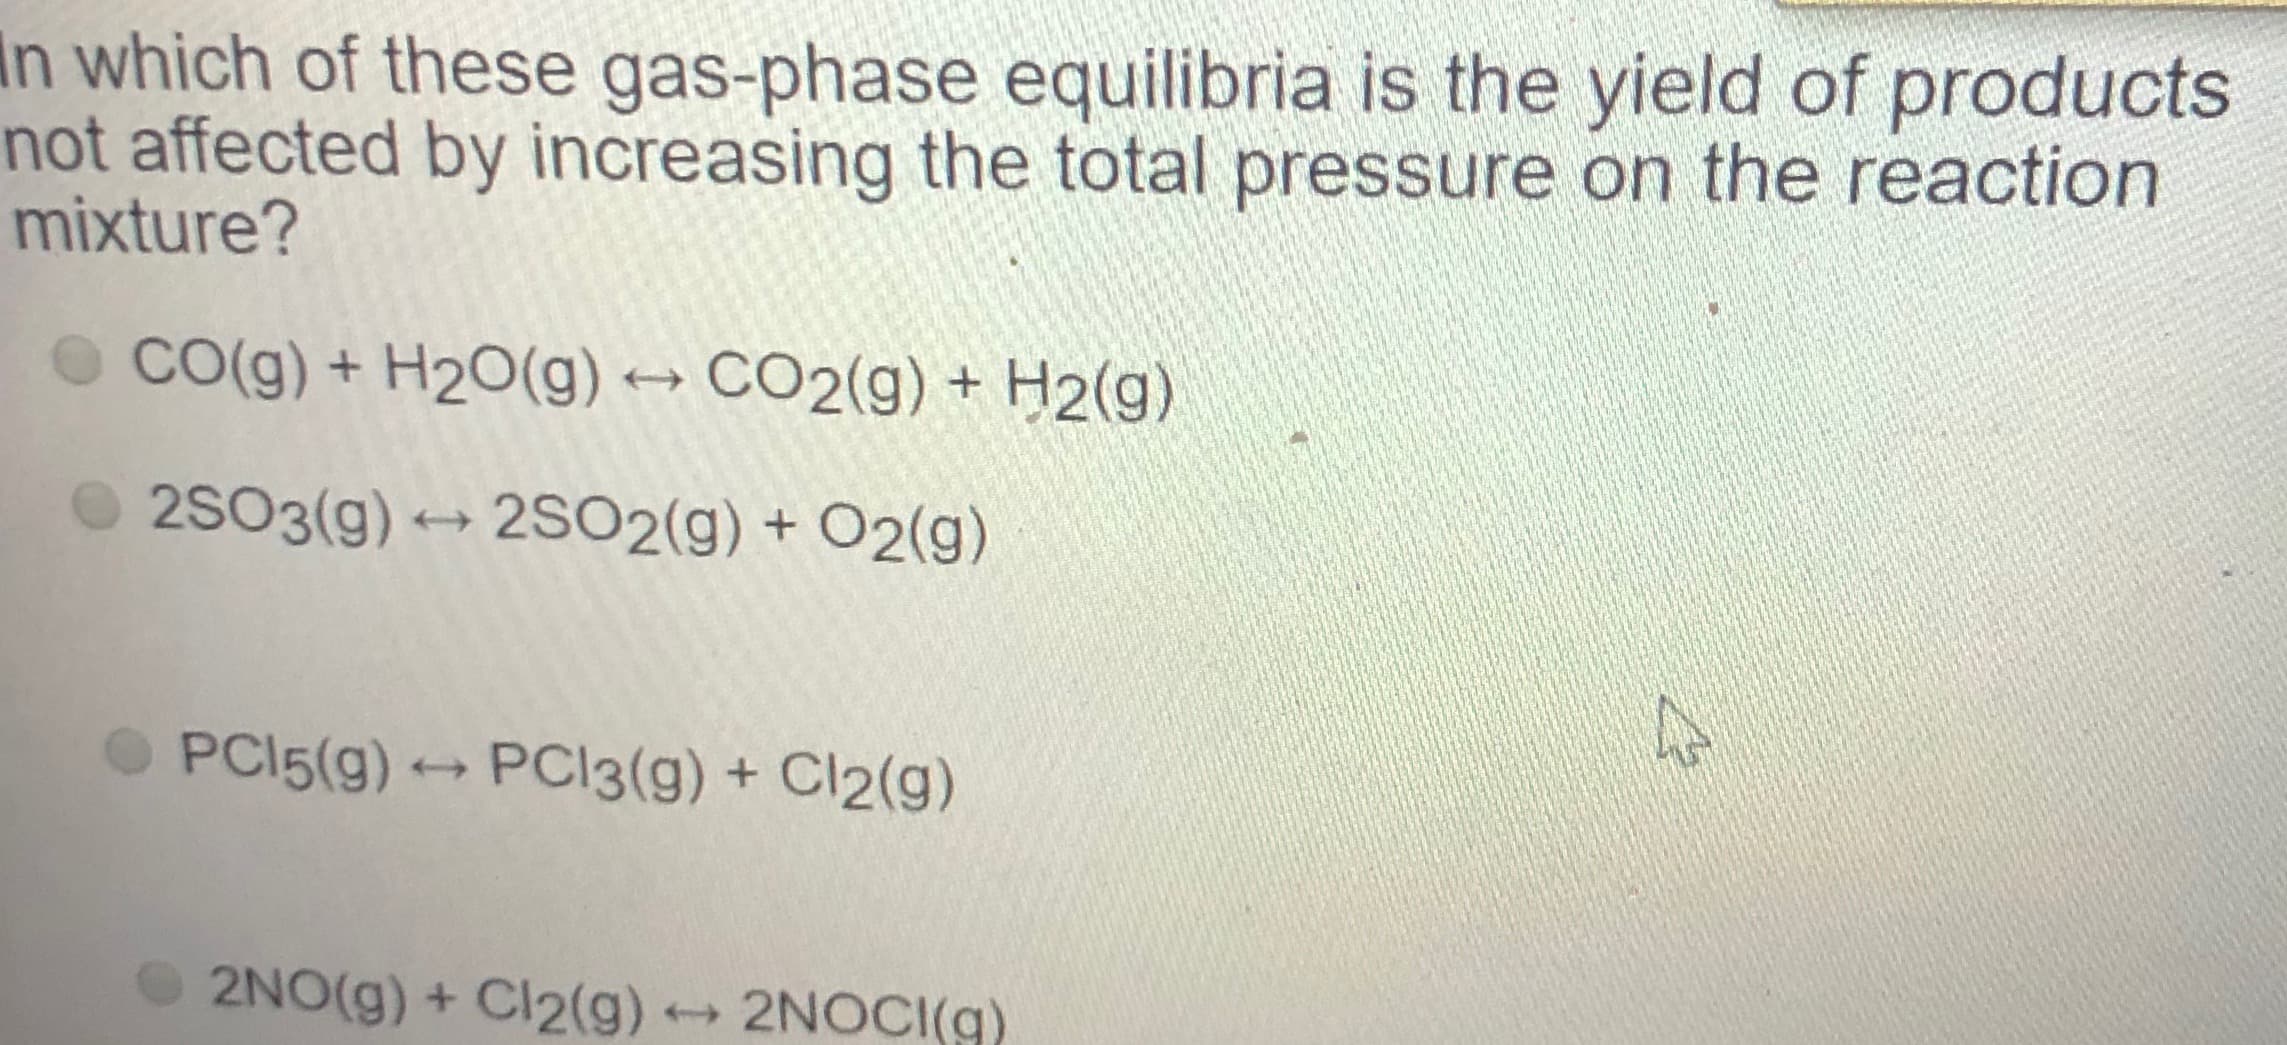 n which of these gas-phase equilibria is the yield of products
hot affected by increasing the total pressure on the reaction
mixture?
o Co(g) + H20(g) → CO2(g) + H2(g)
2S03(g) → 2SO2(g) + O2(g)
